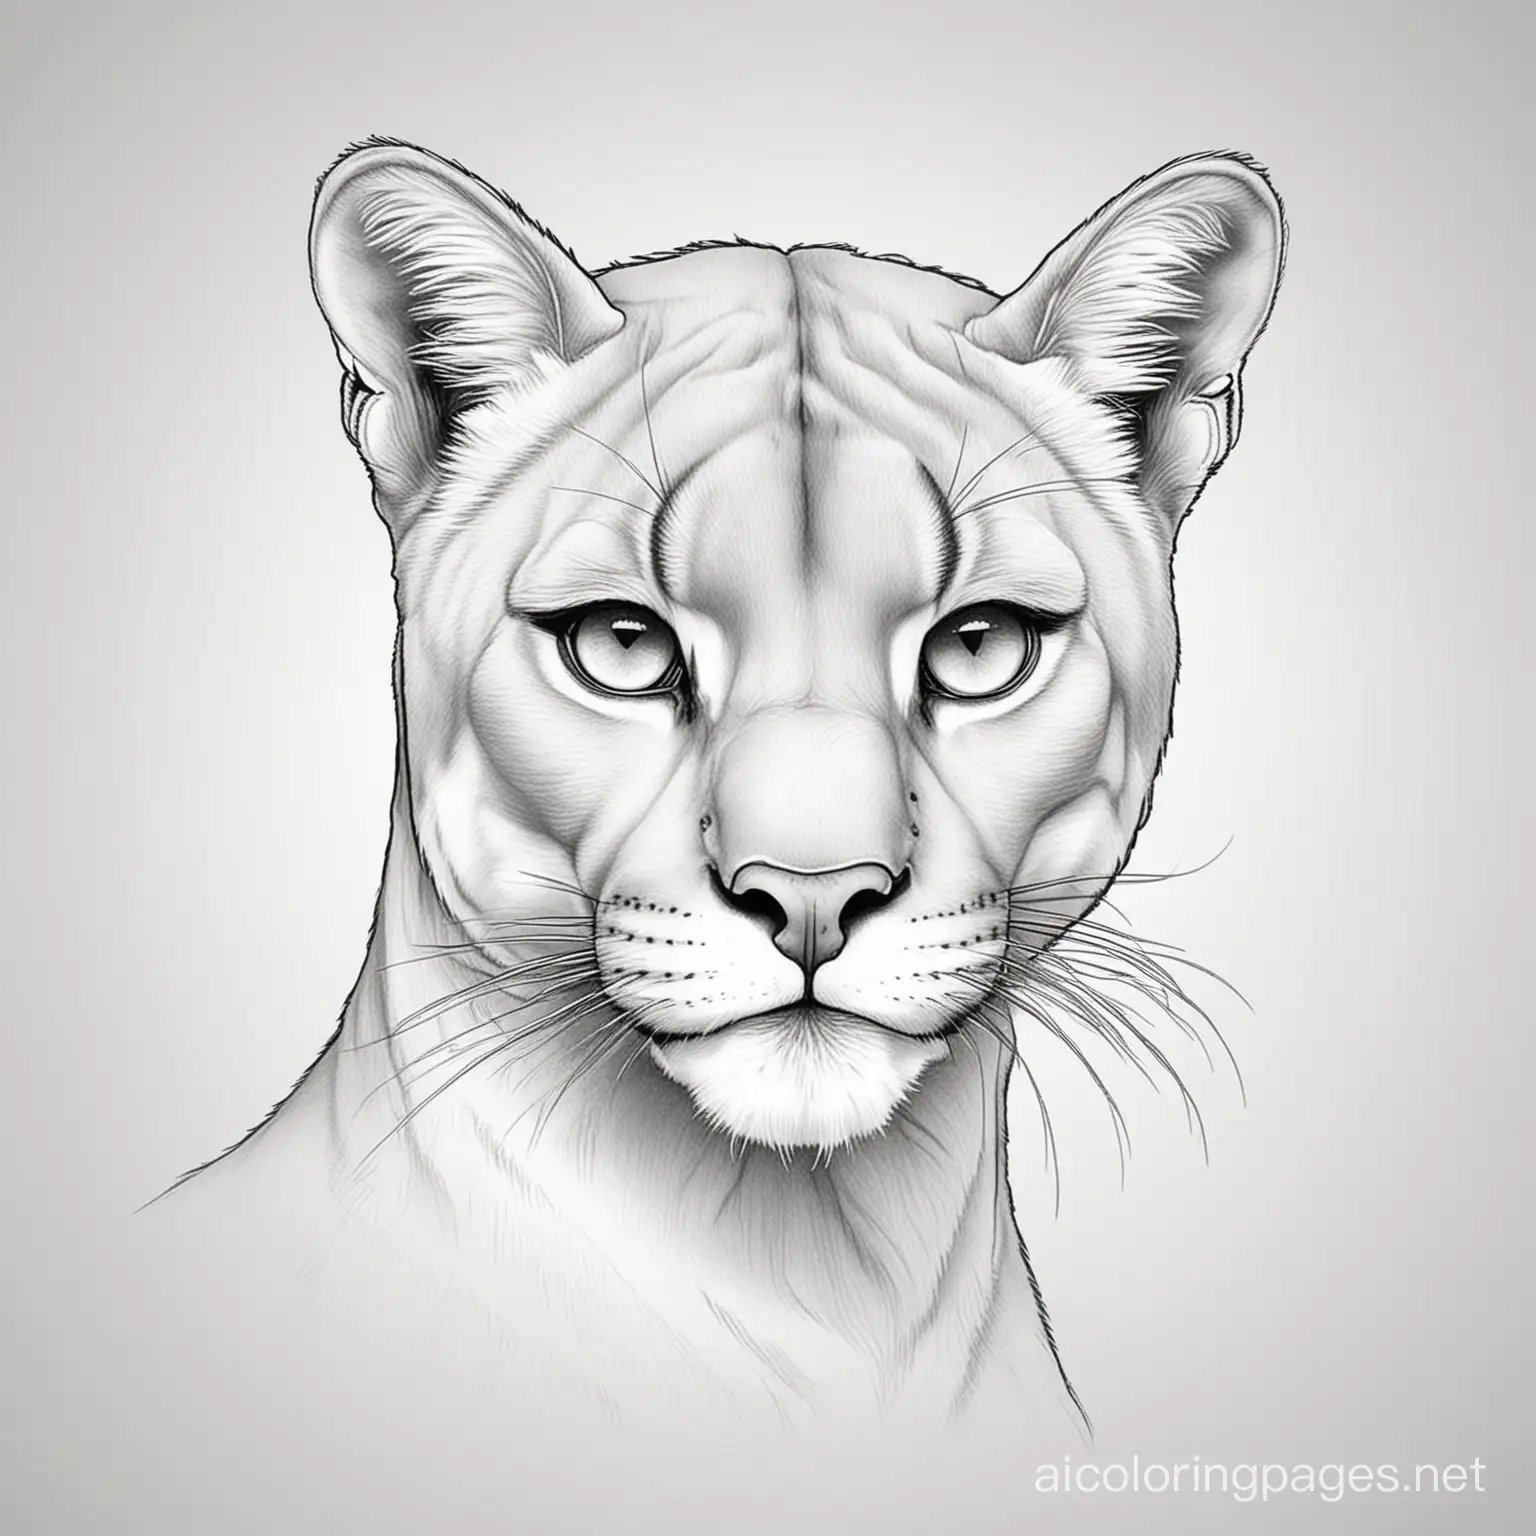 cougar

, Coloring Page, black and white, line art, white background, Simplicity, Ample White Space. The background of the coloring page is plain white to make it easy for young children to color within the lines. The outlines of all the subjects are easy to distinguish, making it simple for kids to color without too much difficulty